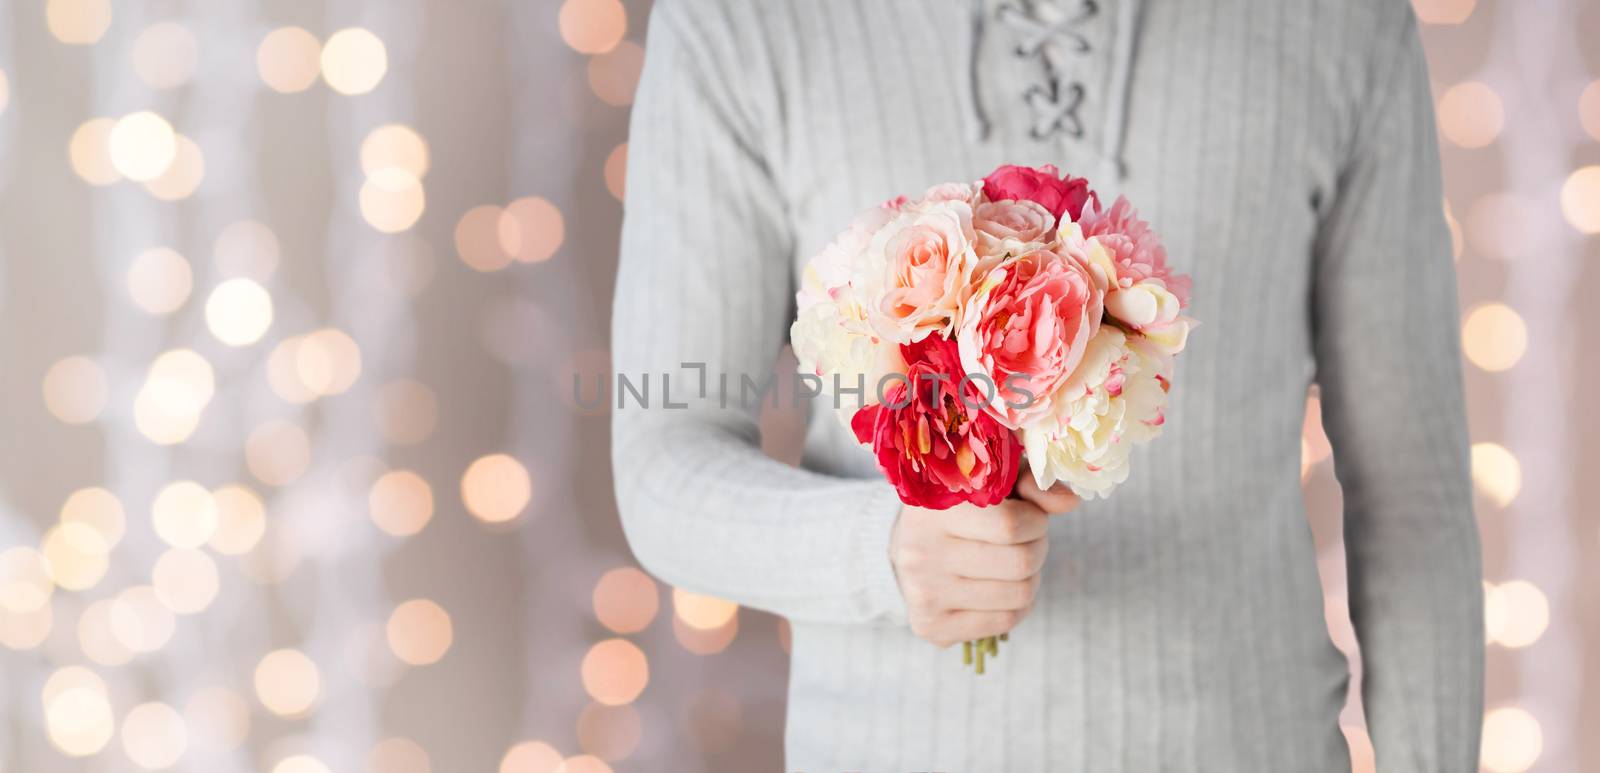 holidays, people, feelings and greetings concept - close up of man holding bunch of flowers over lights background